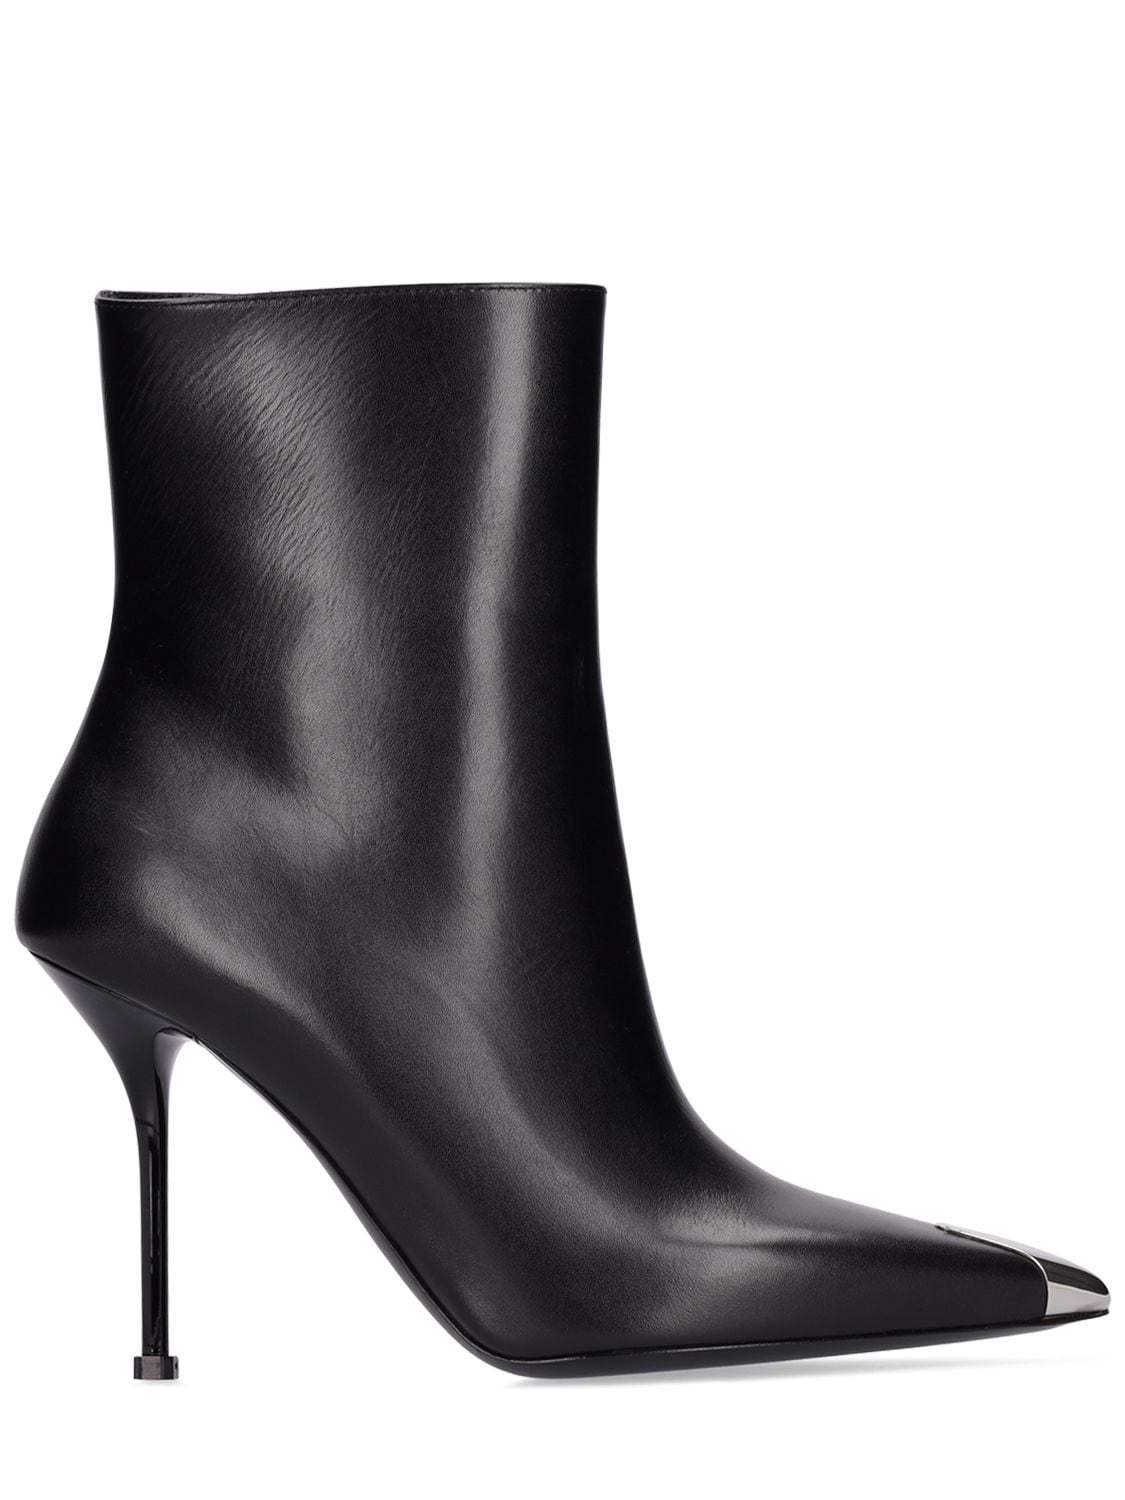 ALEXANDER MCQUEEN 105MM PUNK LEATHER ANKLE BOOTS